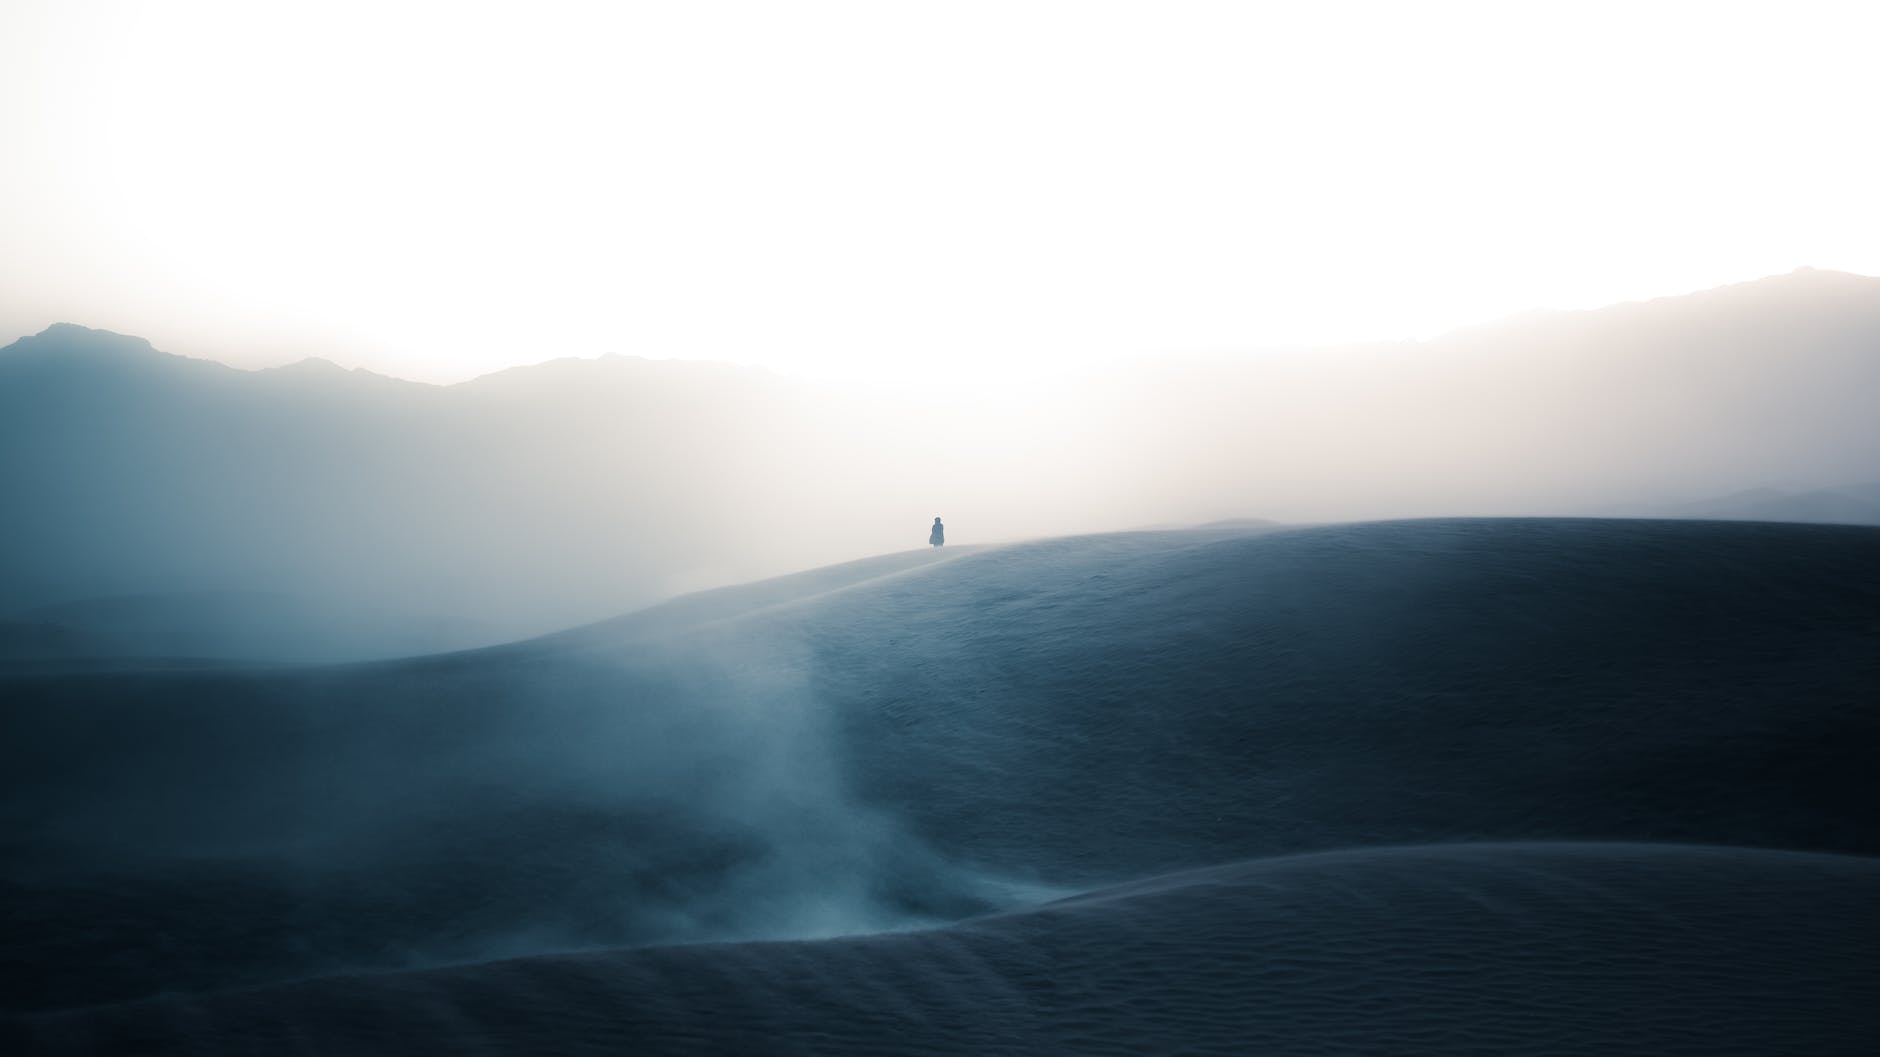 silhouette of a person on a desert in distance